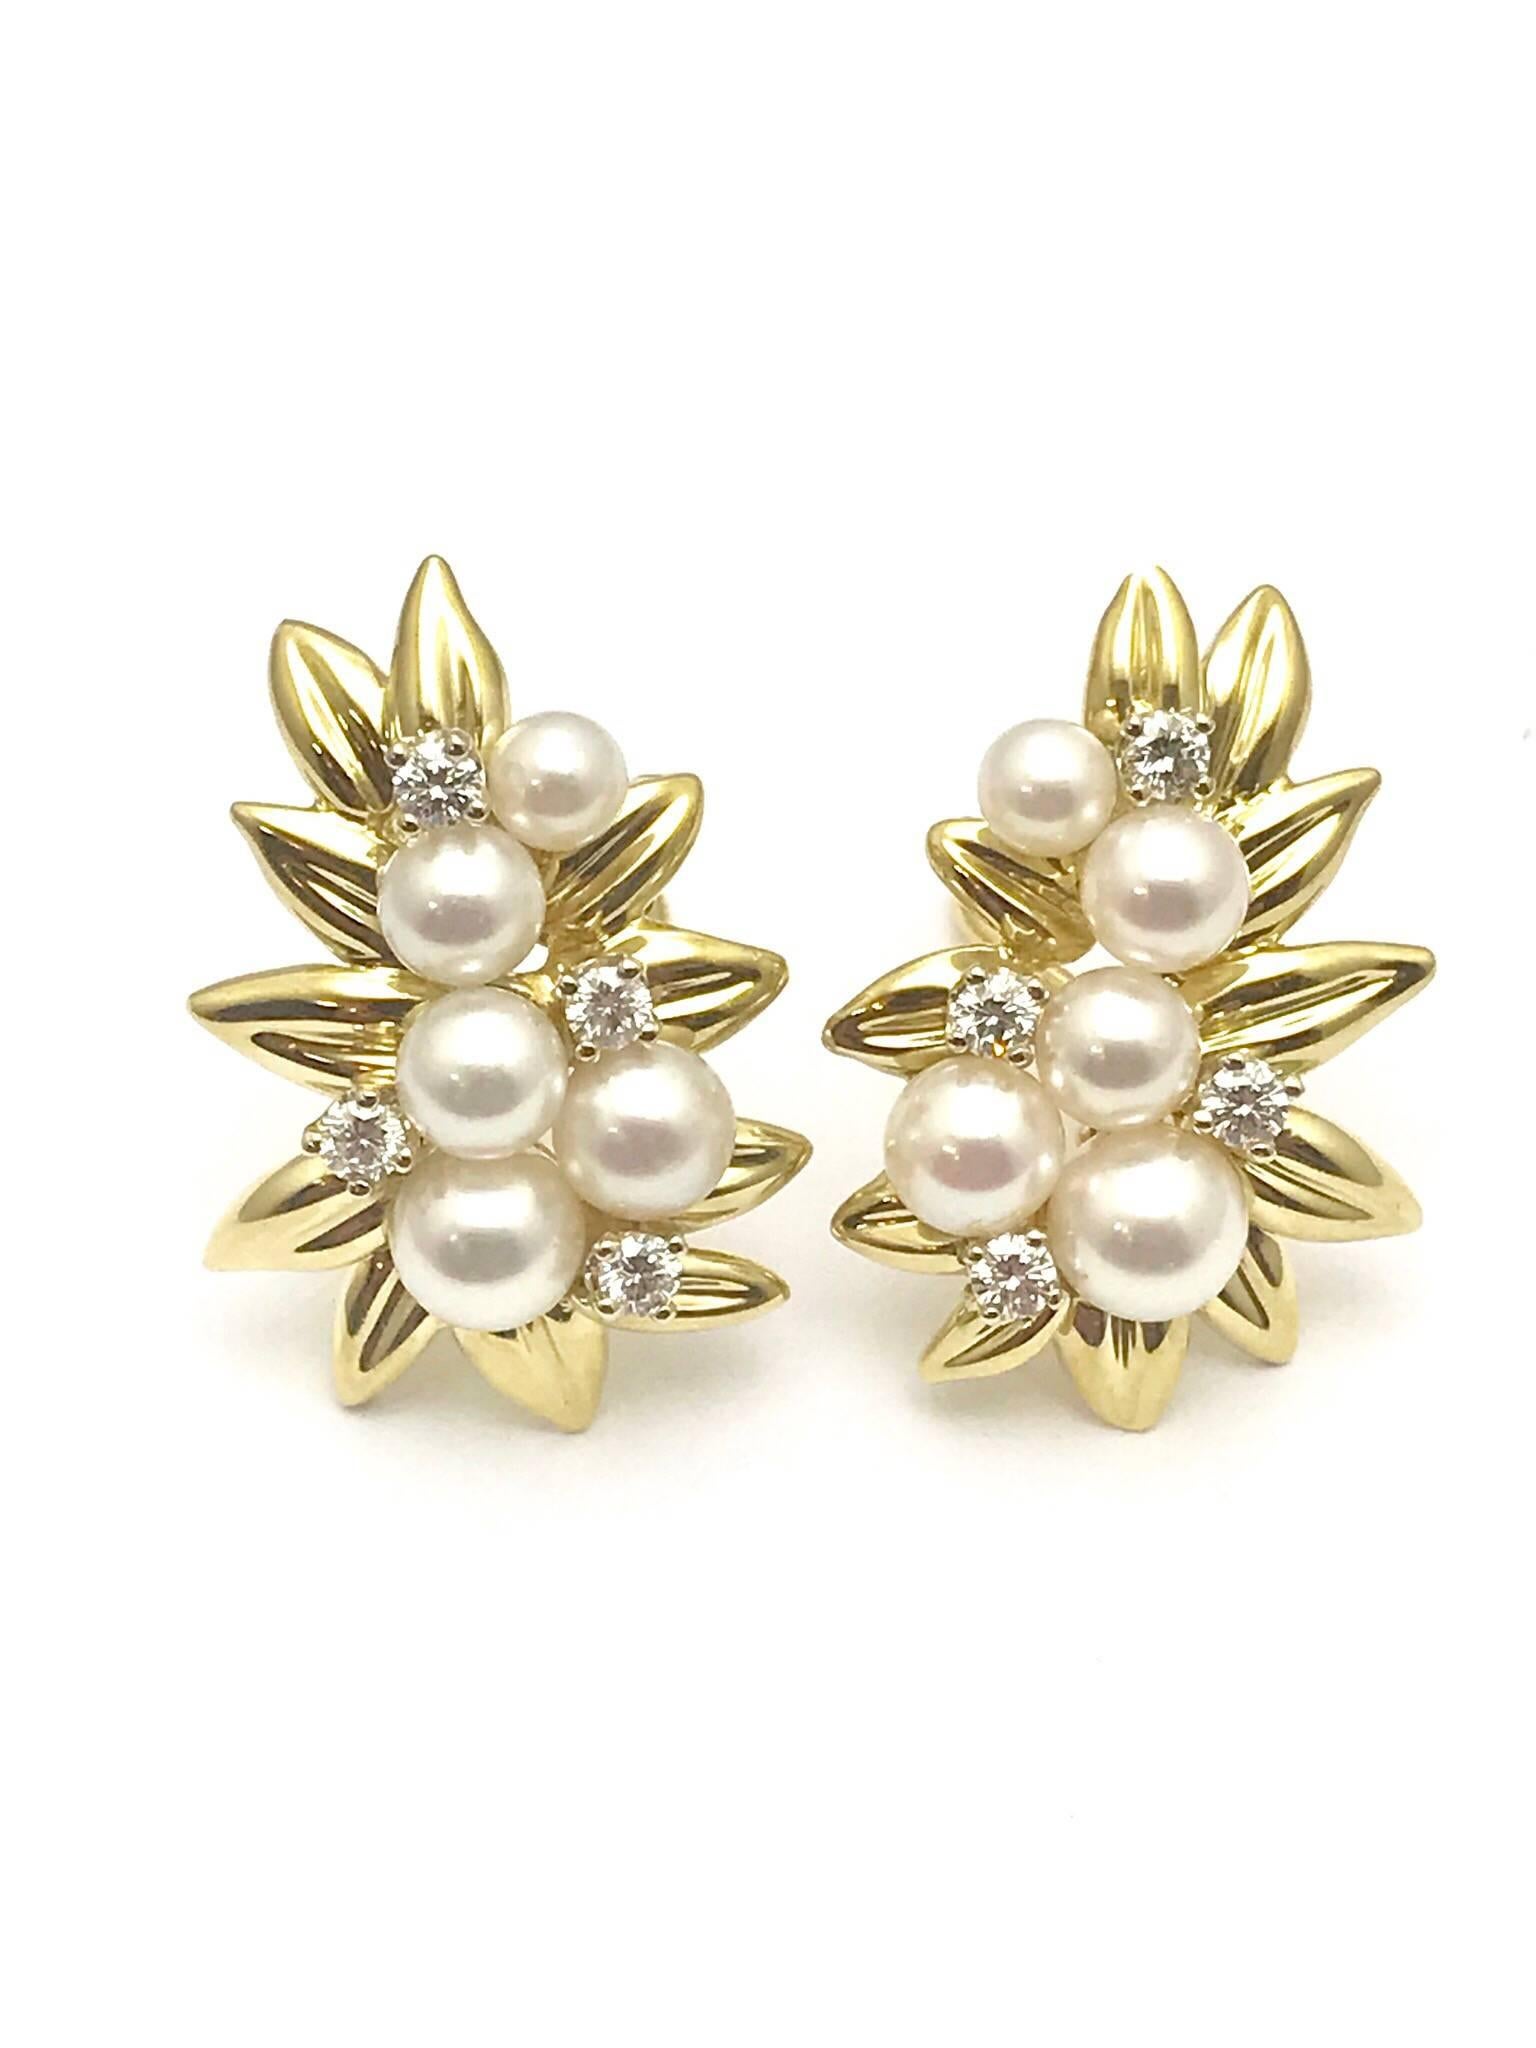 Women's or Men's Tiffany & Co. Cultured Pearl and Diamond Gold Leaf Clip Earrings